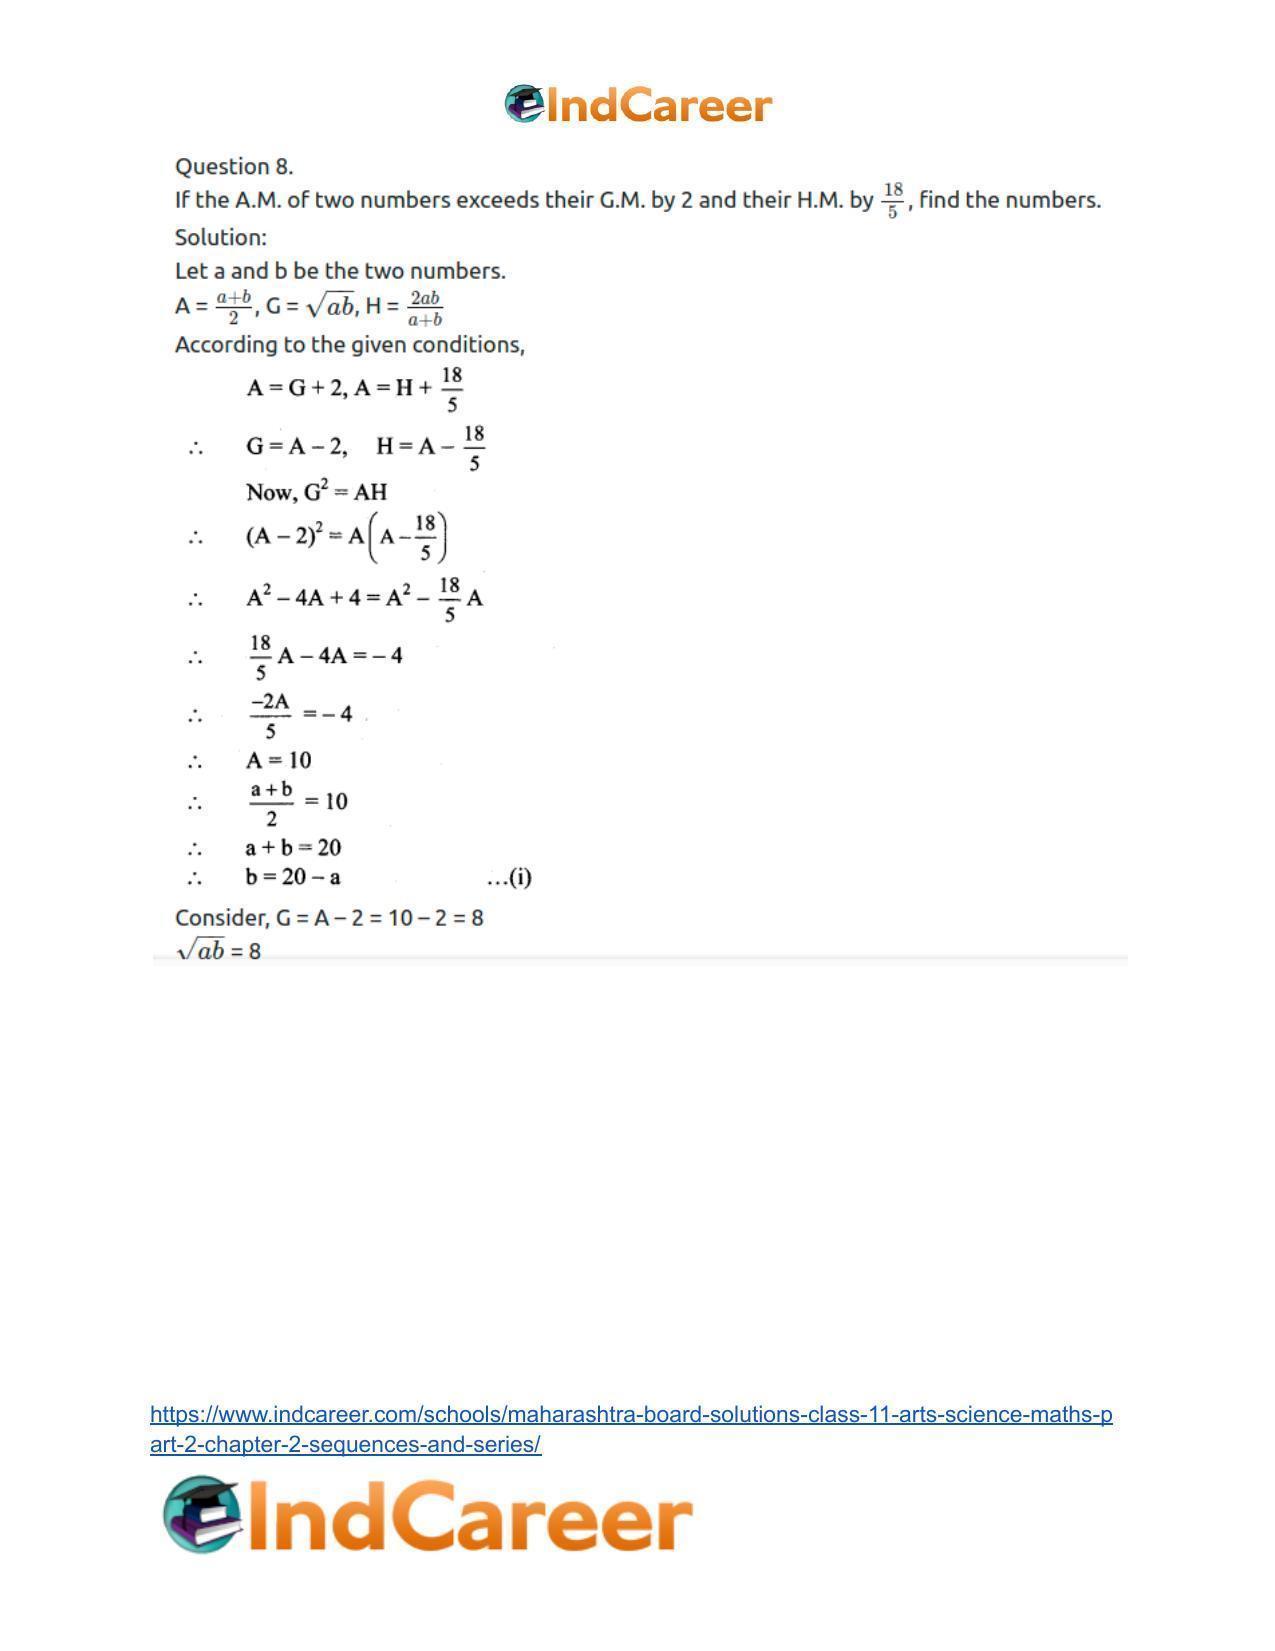 Maharashtra Board Solutions Class 11-Arts & Science Maths (Part 2): Chapter 2- Sequences and Series - Page 57